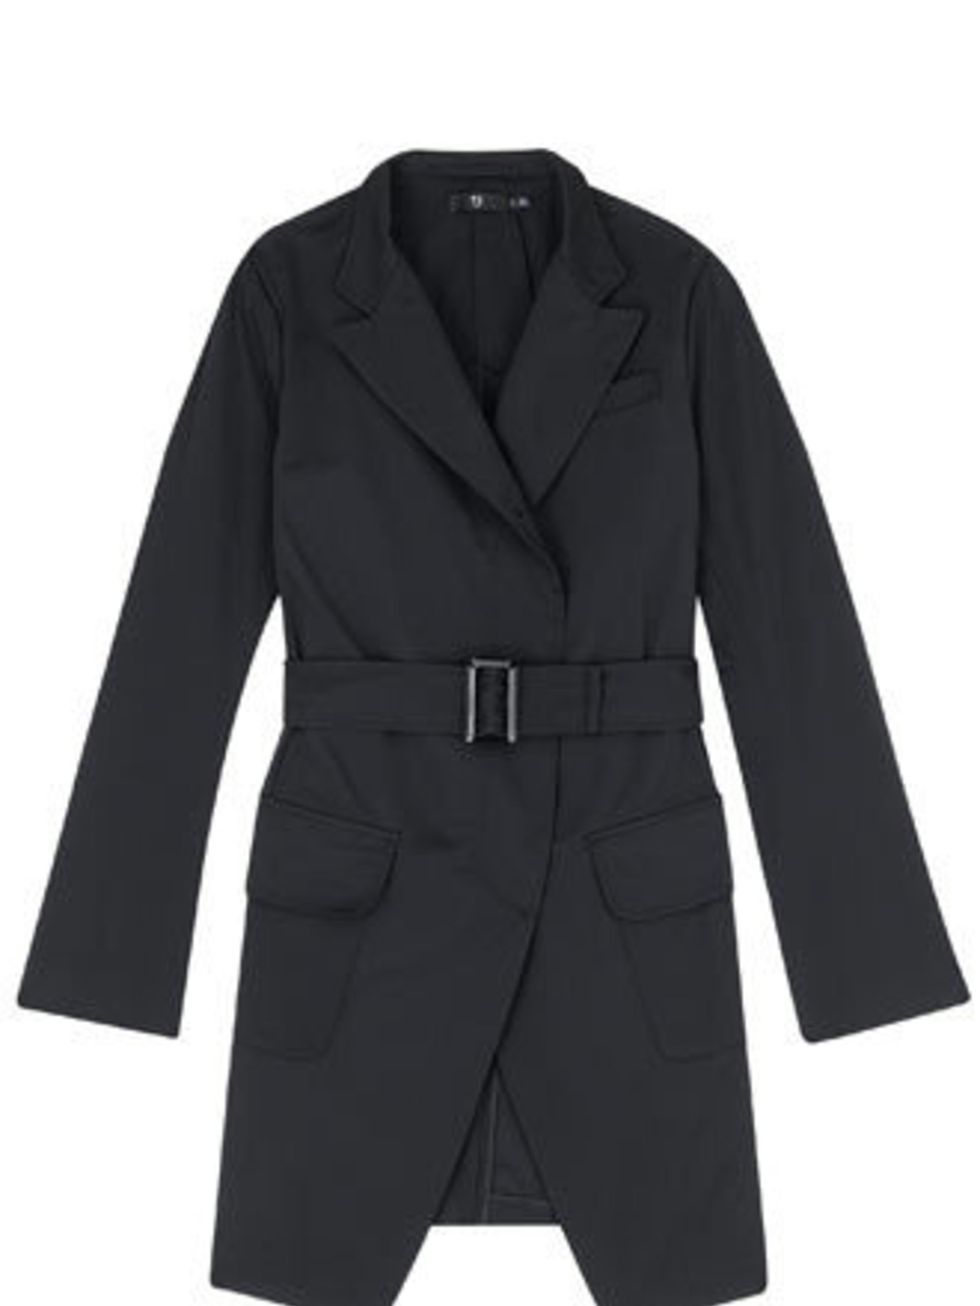 <p>This coat from Uniqlo, hitting stores Thursday, is a great way to buy into the Jil Sander brand without breaking the bank. Its chic, practical and will go with everything  what more could a girl want? </p><p>Coat, £99.99 by Jil Sander at <a href="htt